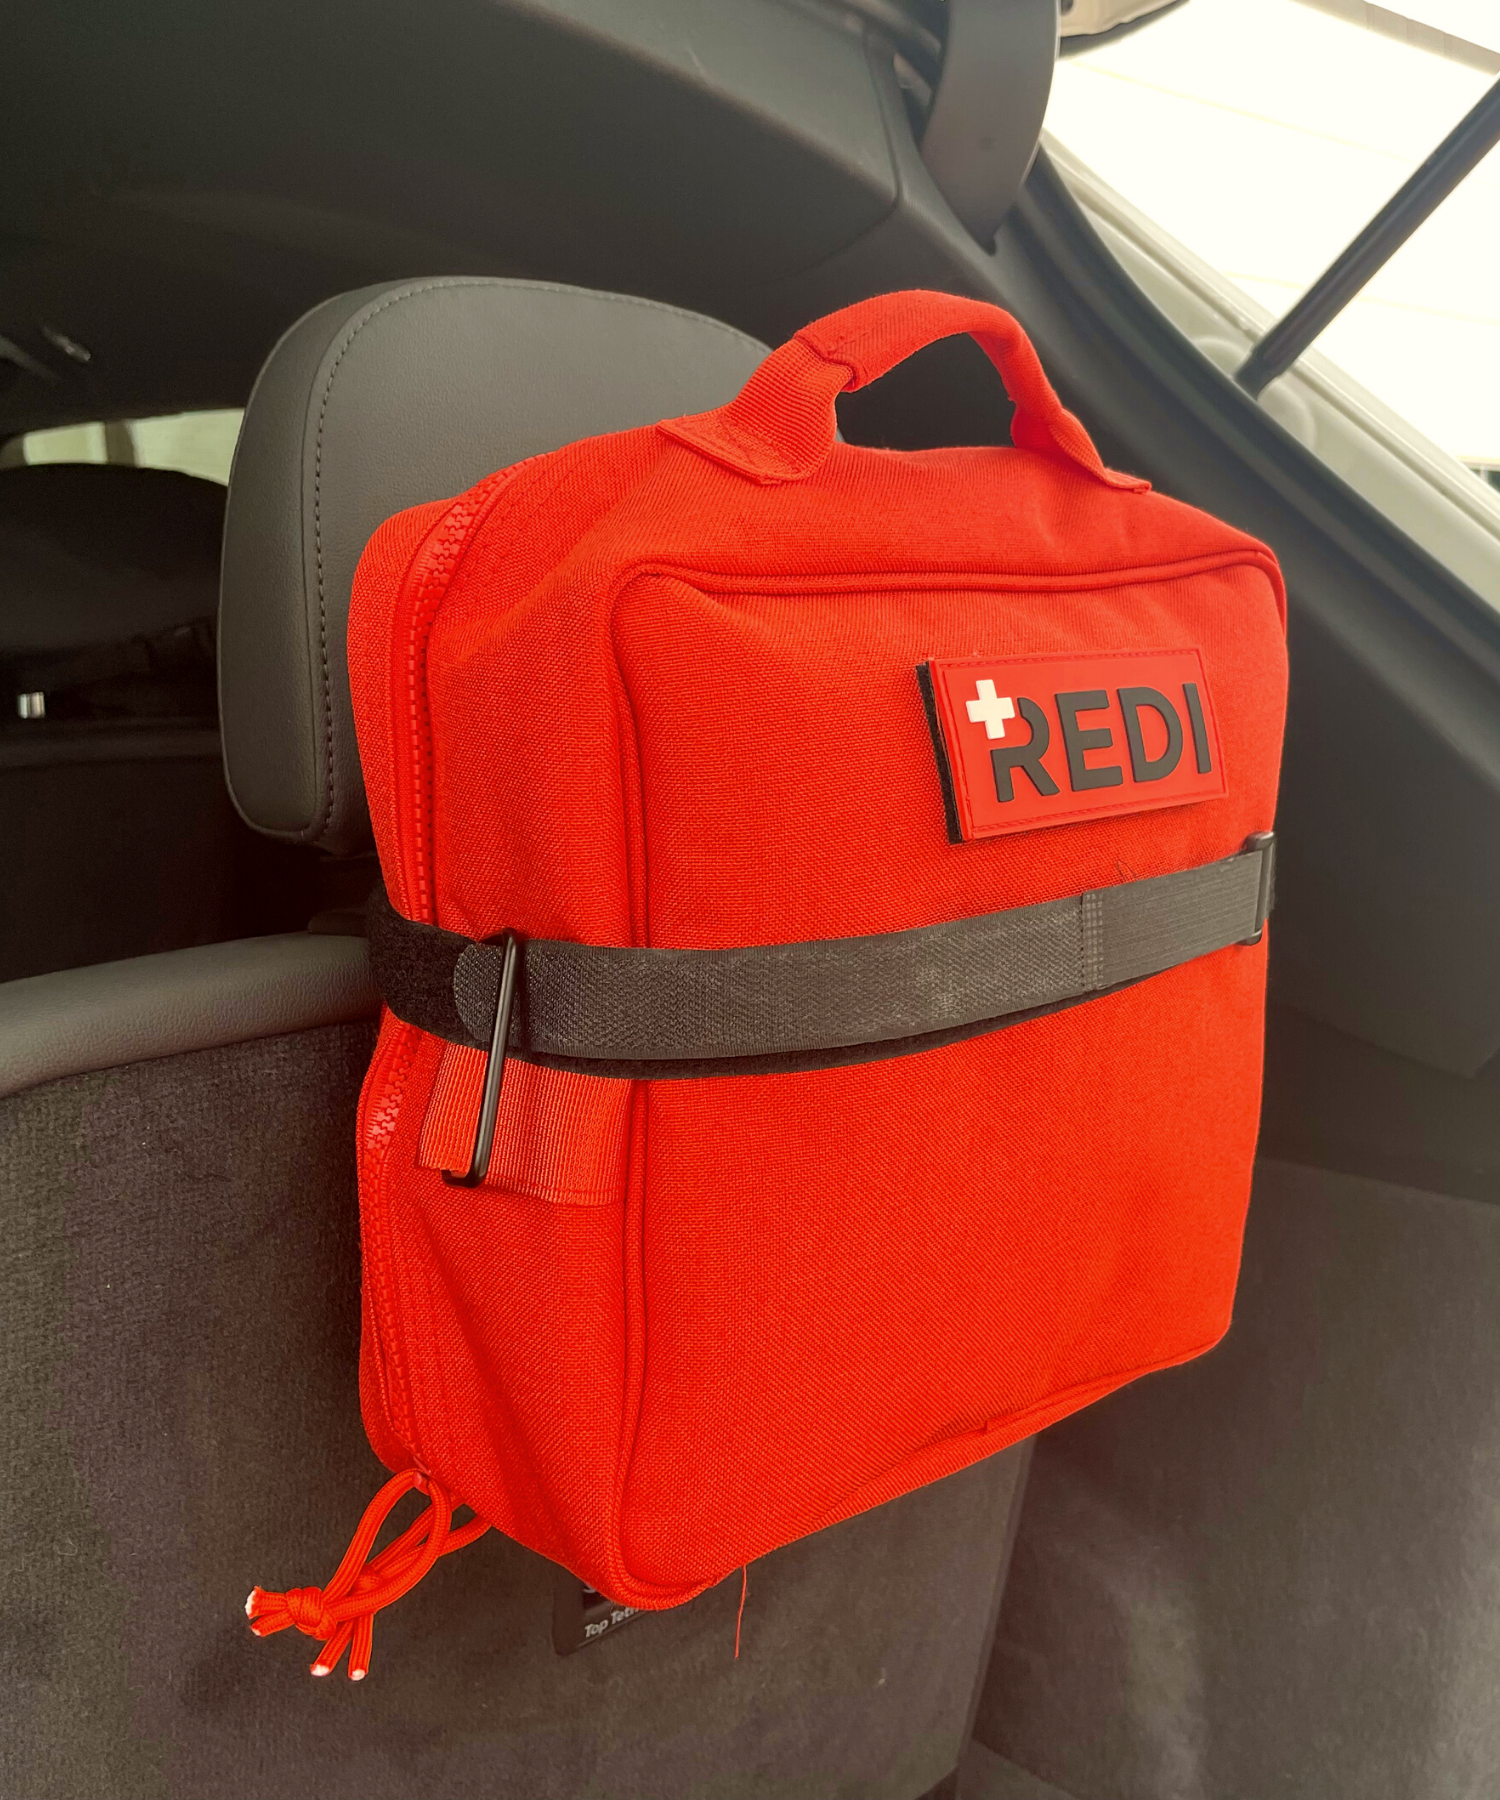 The Roadie, car first aid kit being secured to the headrest with the large velcro strap (car attachment).  